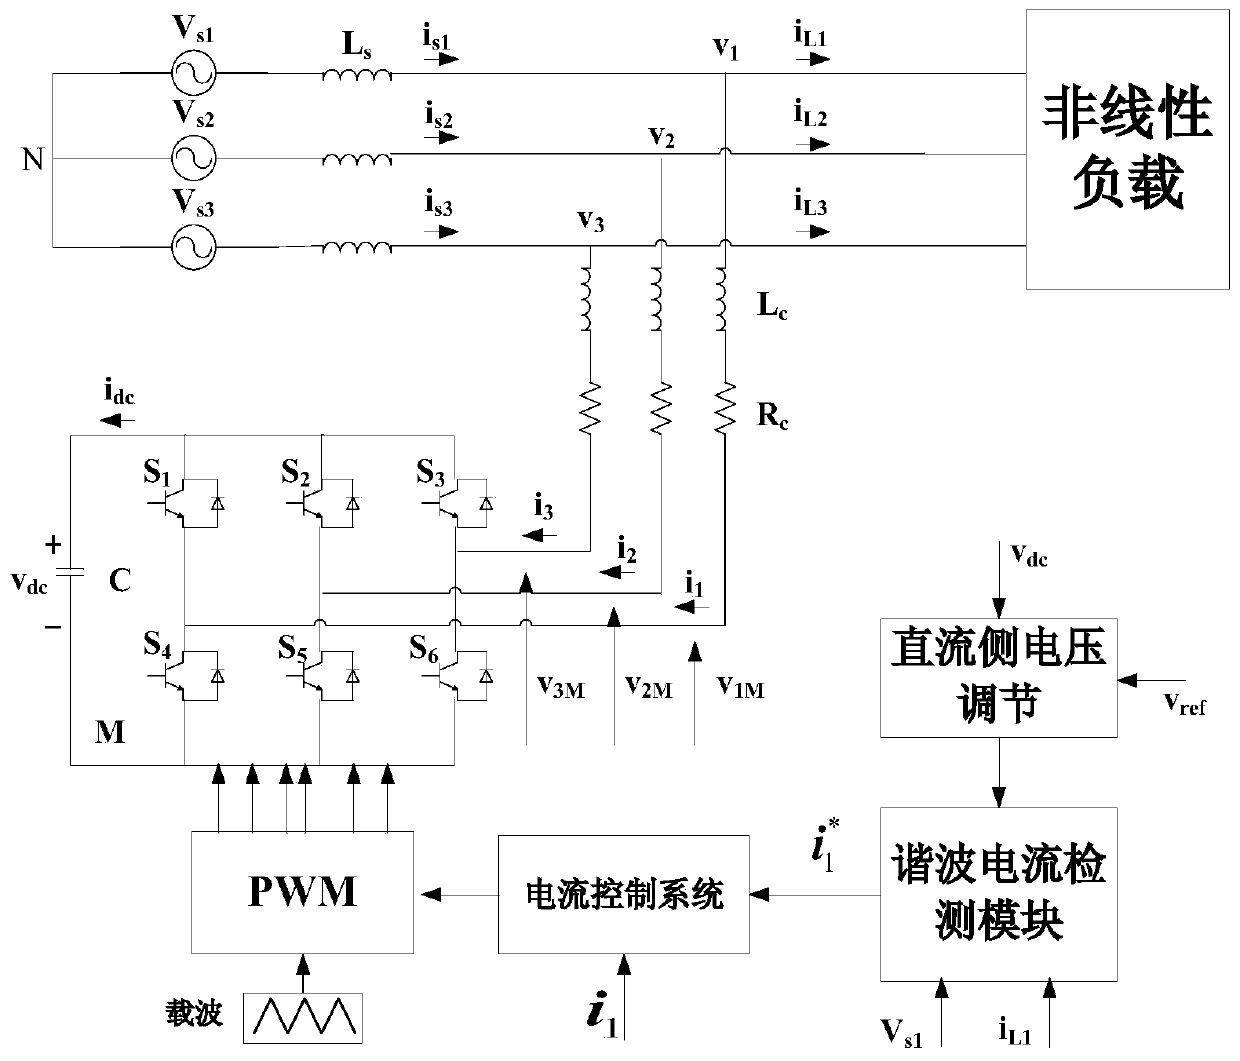 Active Power Filter fnn Control Method Based on Fuzzy Inversion